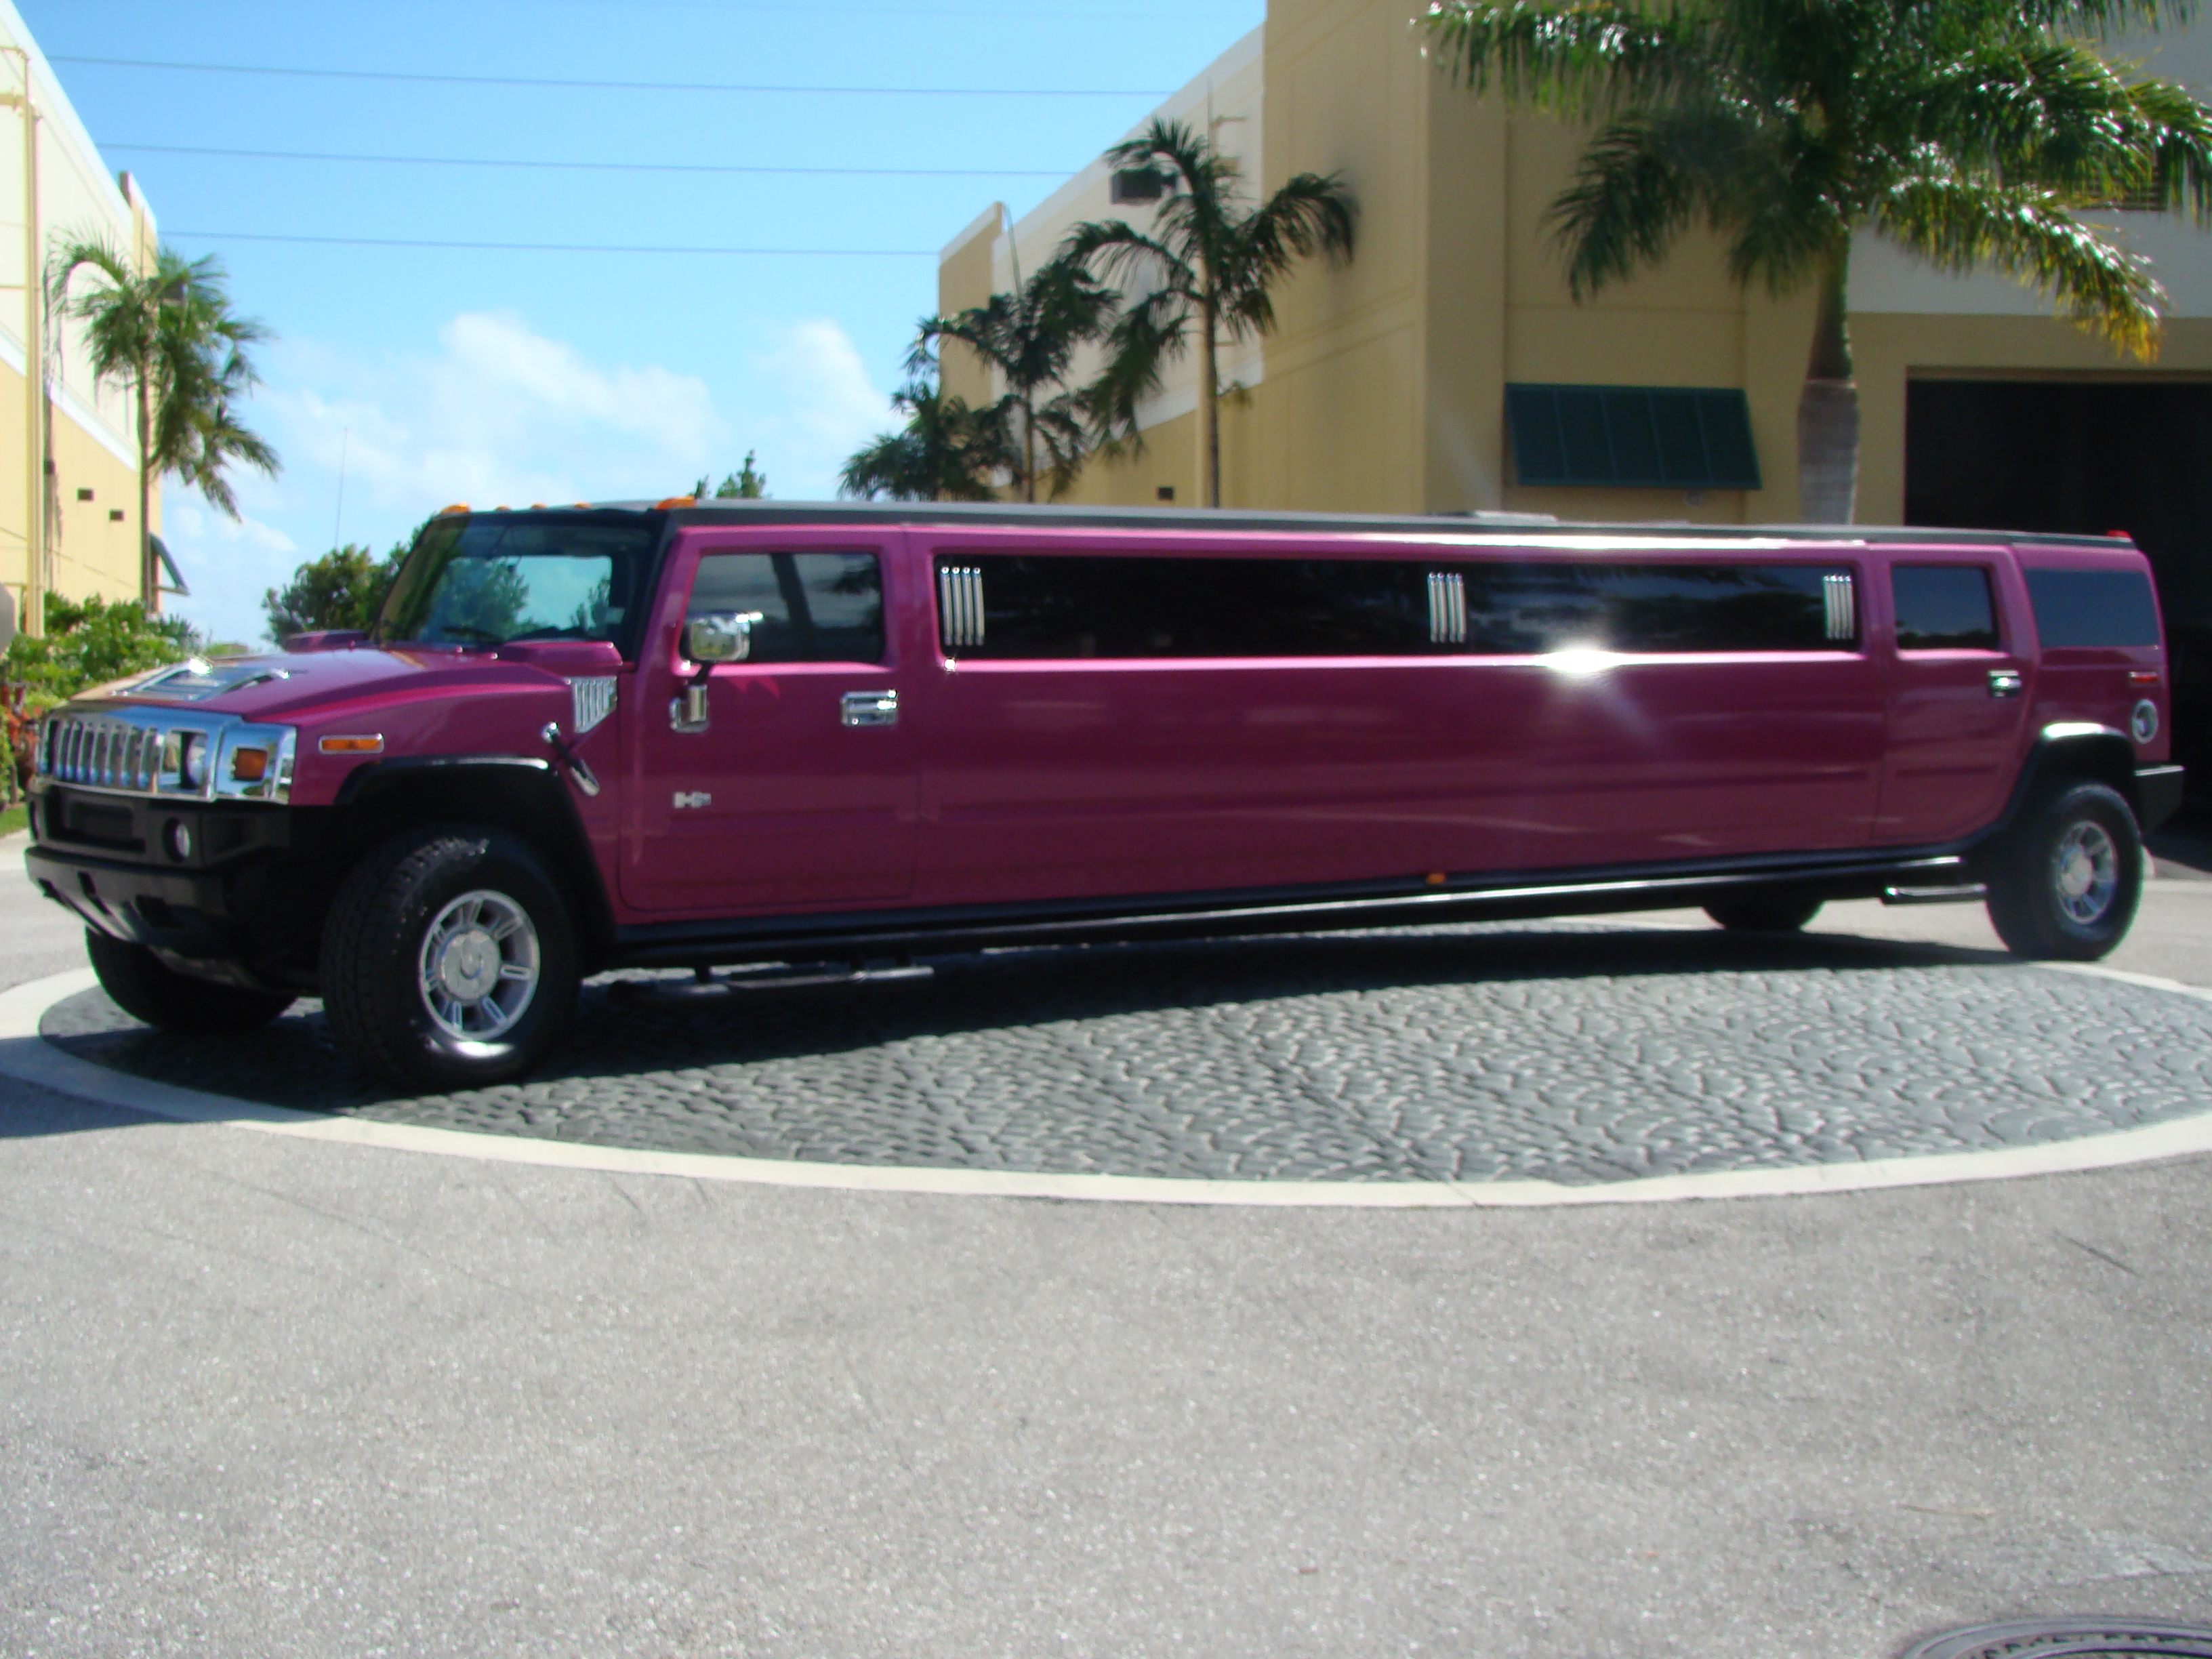 Hummer Limousine HD Wallpaper Background Image Id